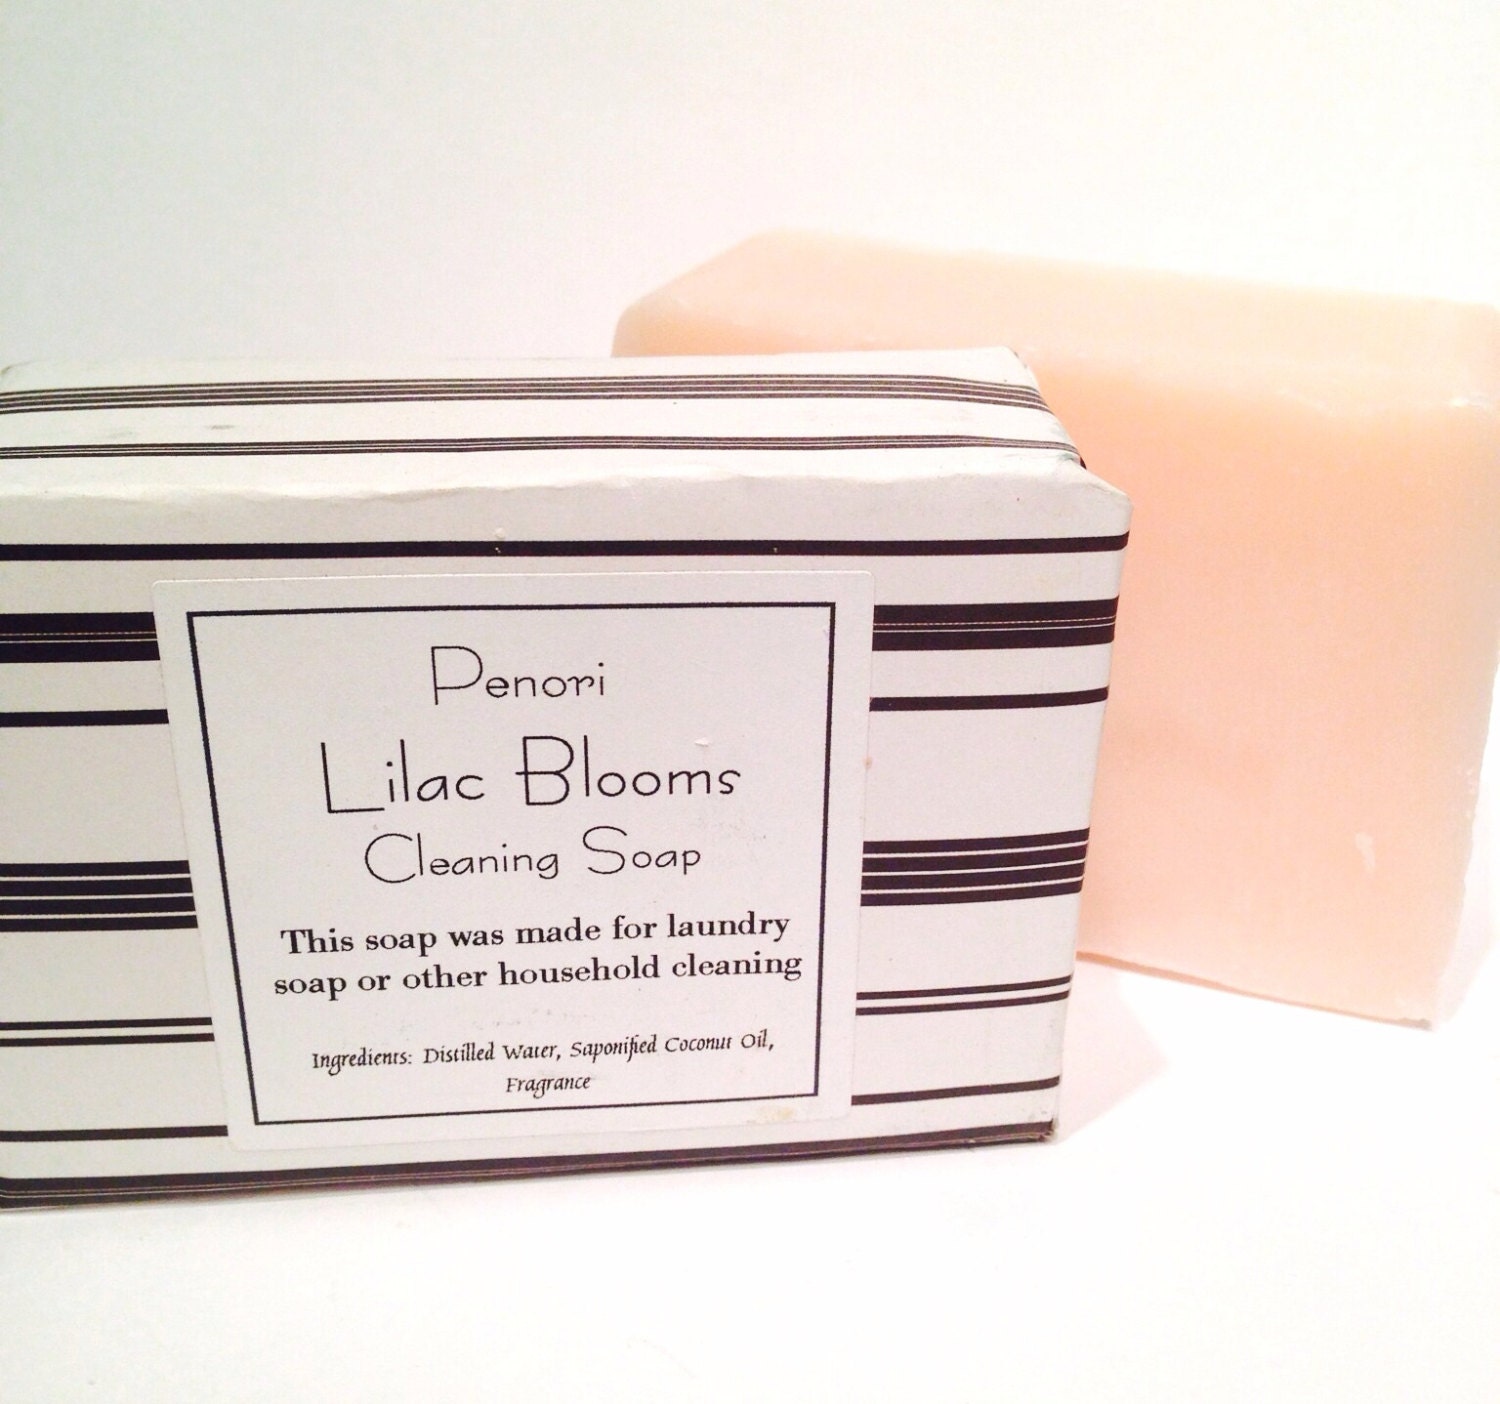 Cleaning Bar Soap - Laundry and Home - Lilac Blooms - Penori